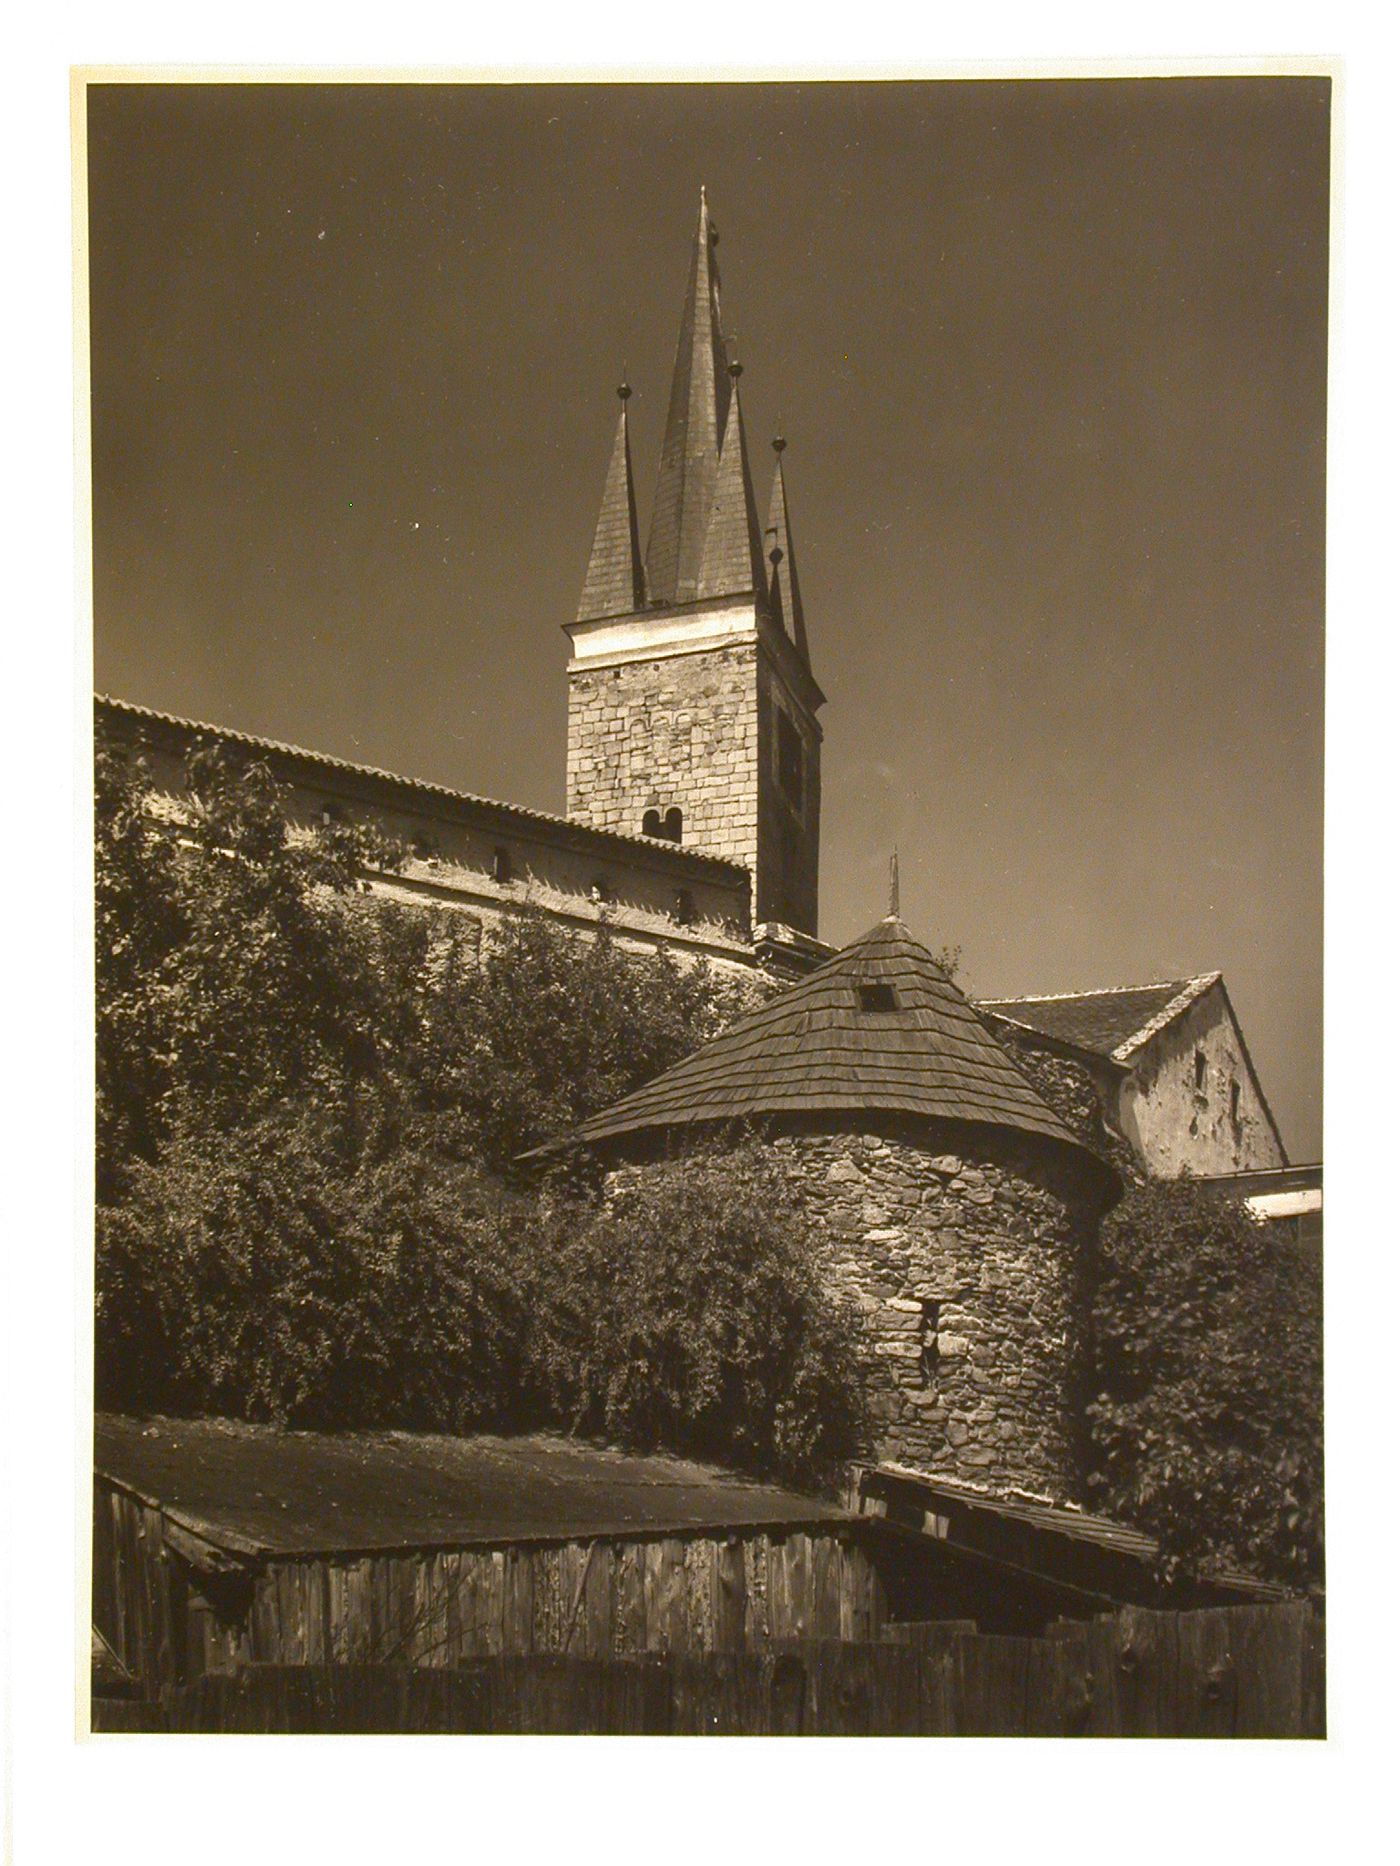 Partial view of the Church of the Holy Spirit showing the tower with the city wall and a fortified tower in the foreground, Telc, Czechoslovakia (now Czech Republic)